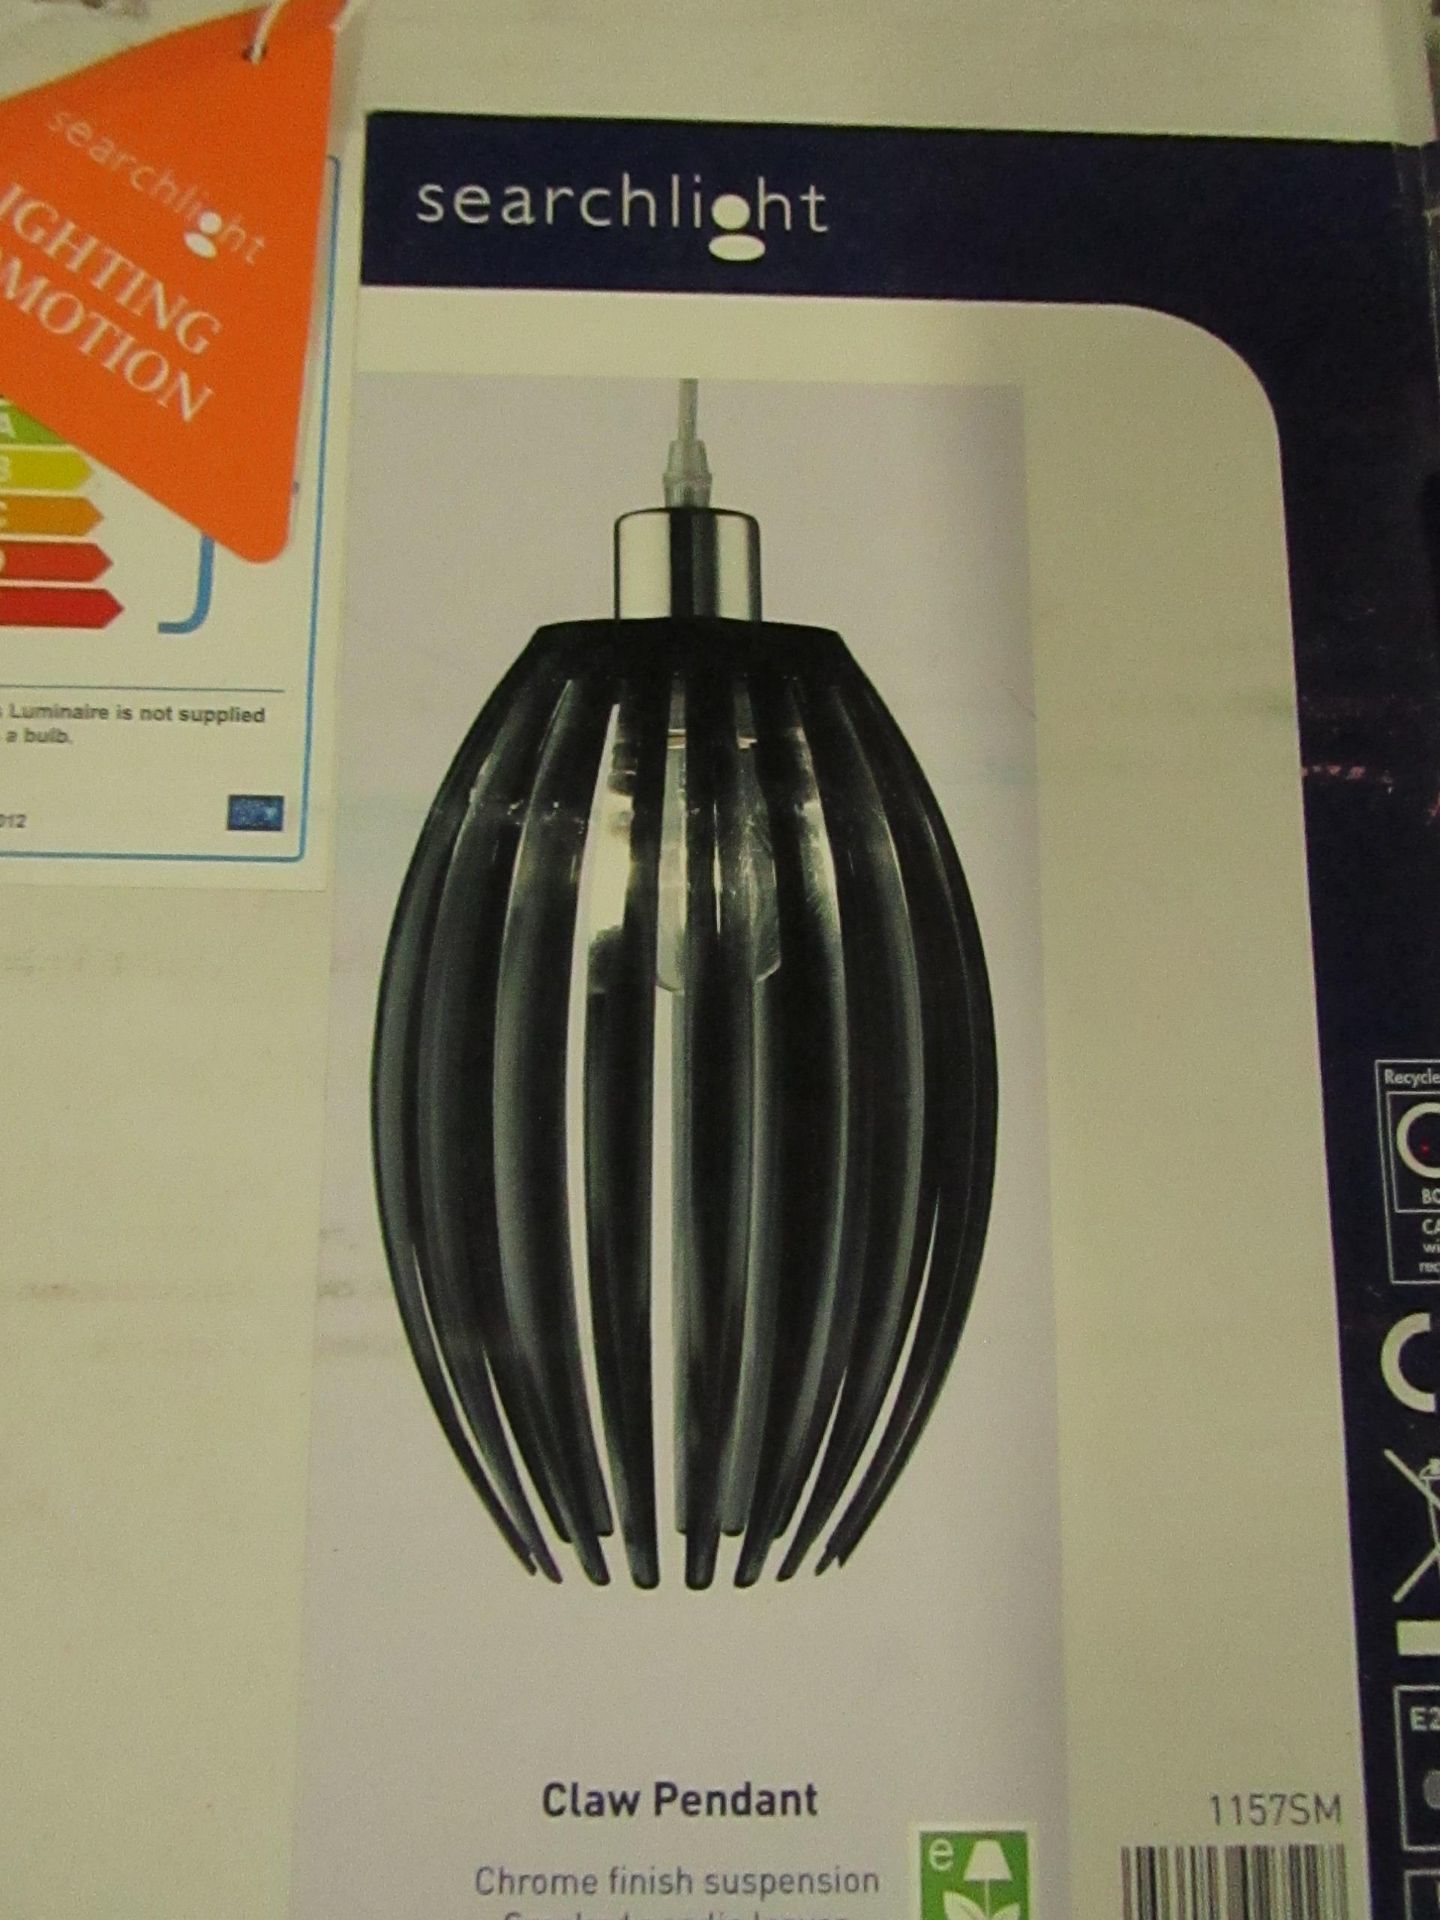 Searchlight Dimmable LED Lamp Giant Fillament Bulbs RRP “?58.00 (PLT 3plt) - This lot contains - Image 2 of 2